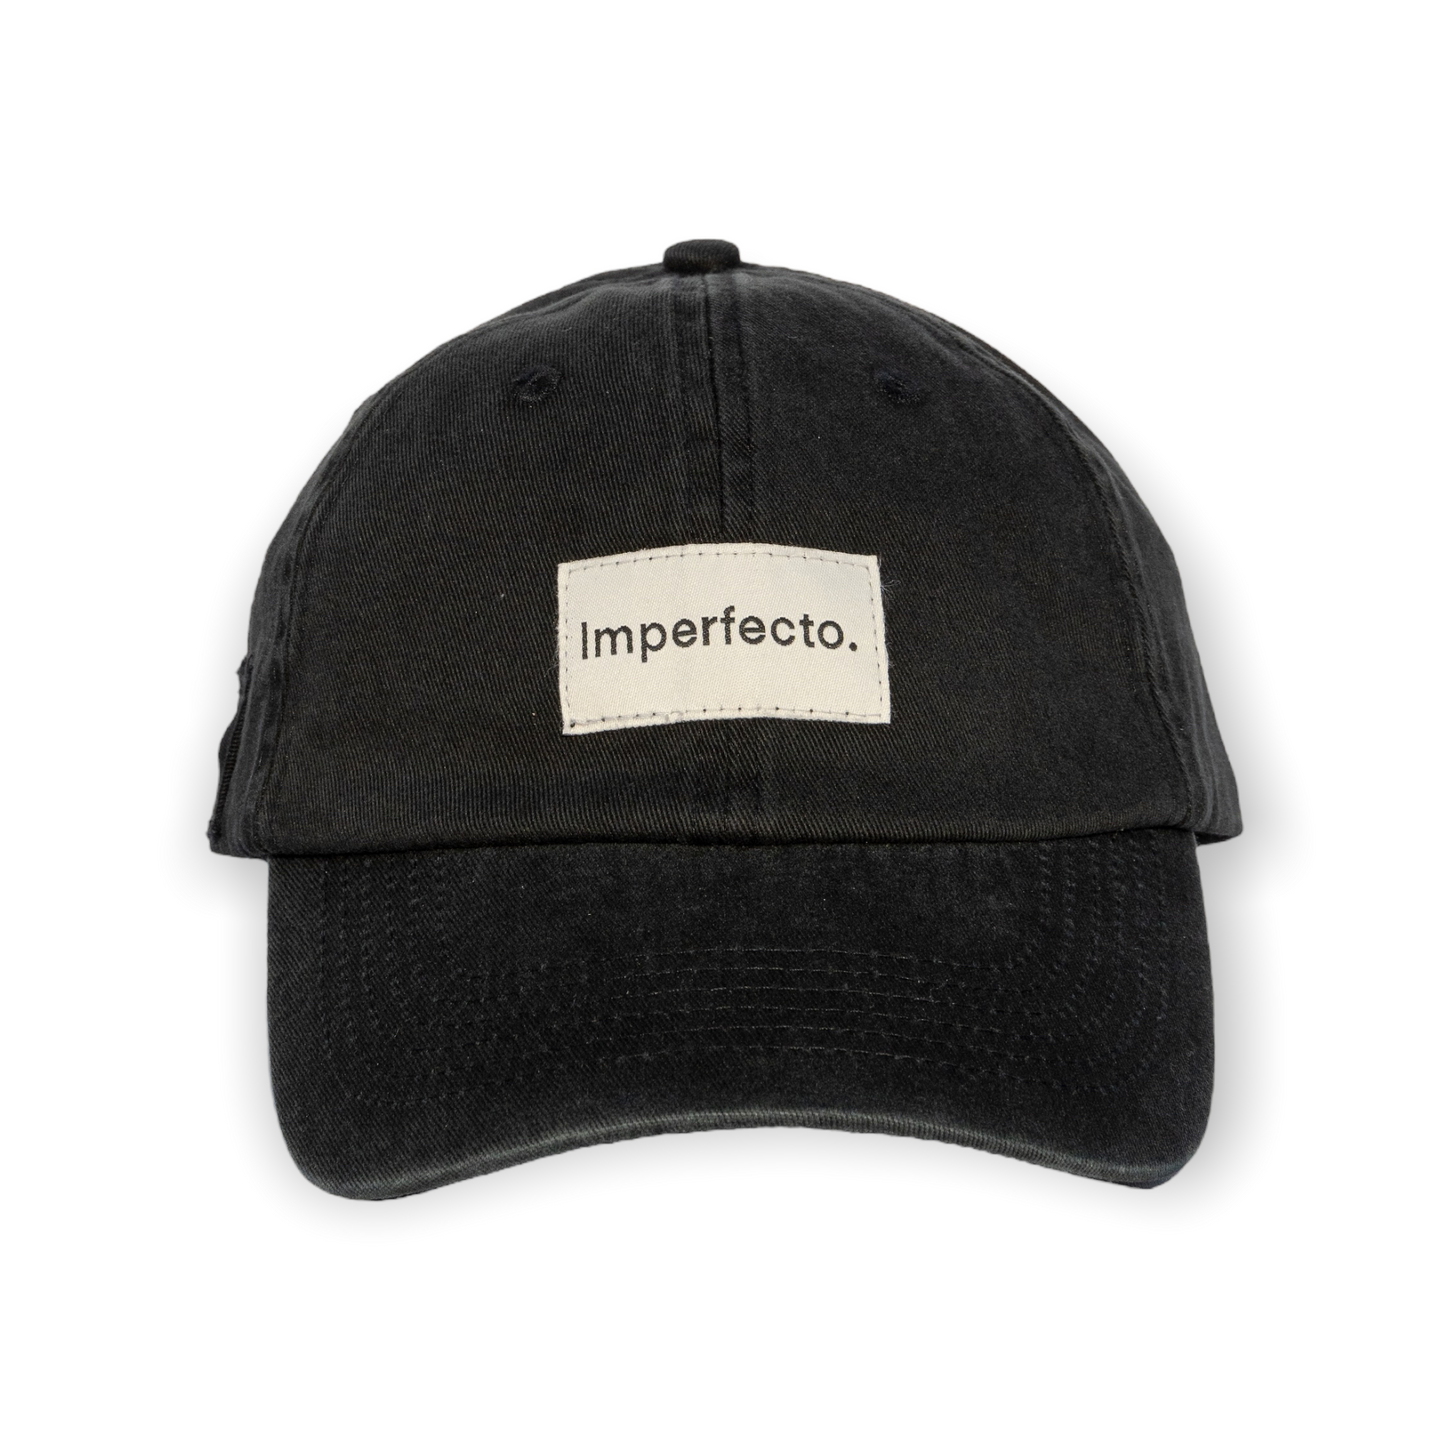 Mästers Hat Washed Black Imperfecto